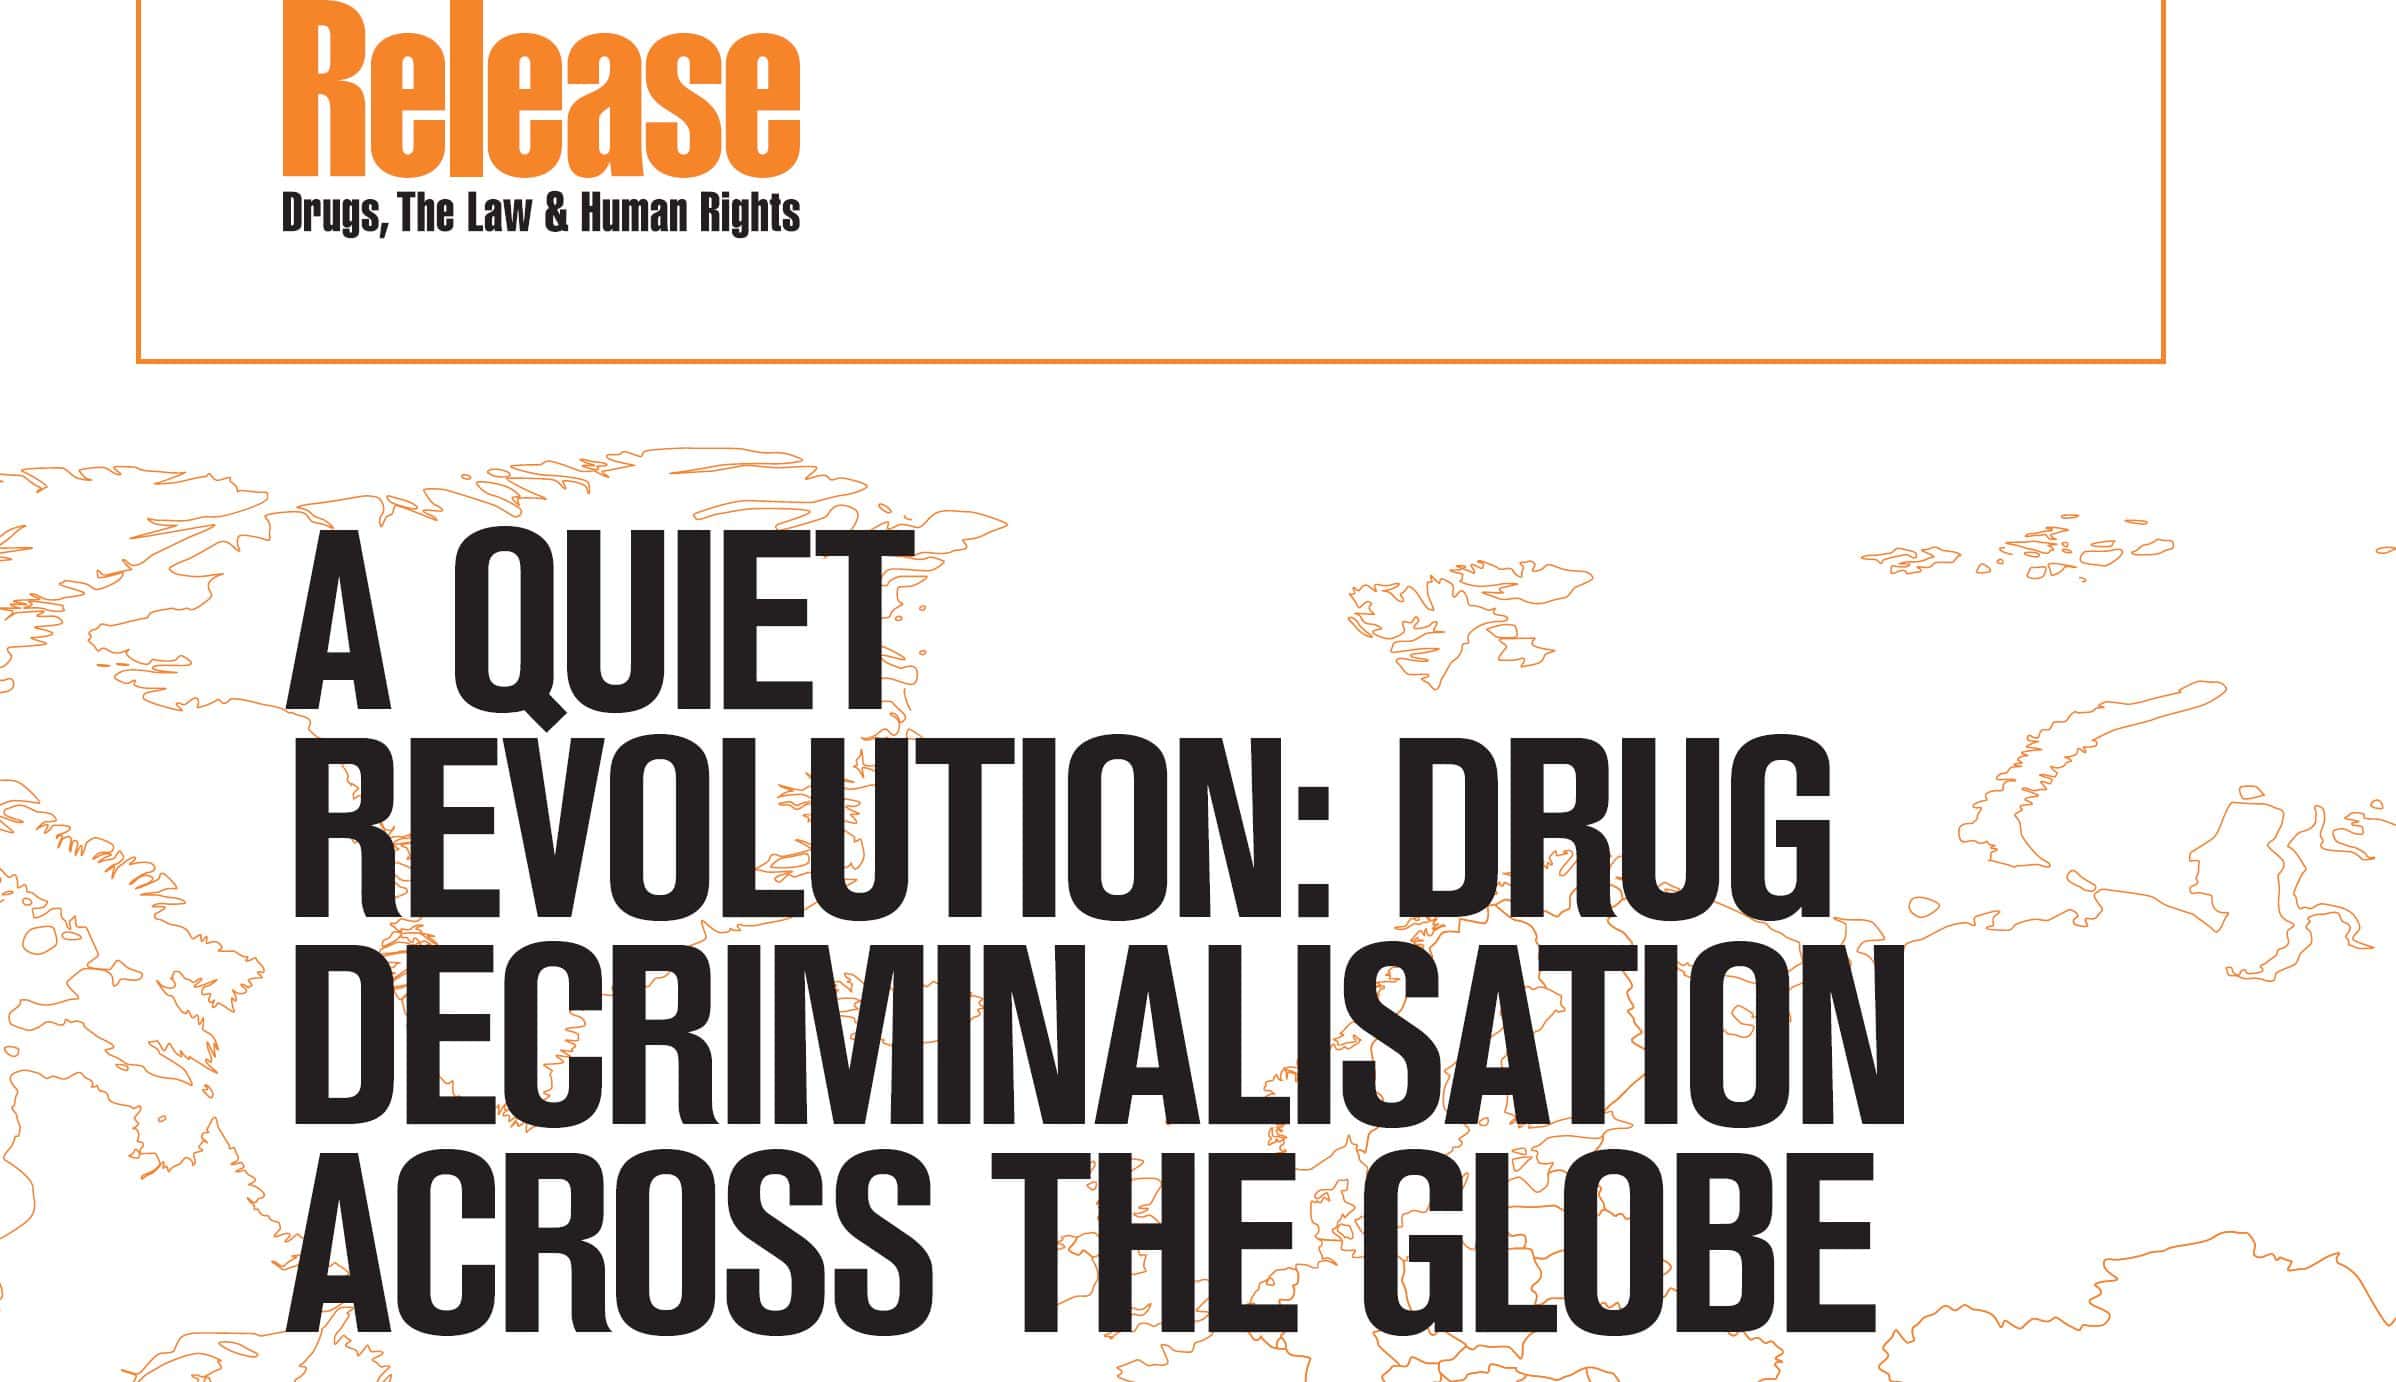 A report cover with an orange logo